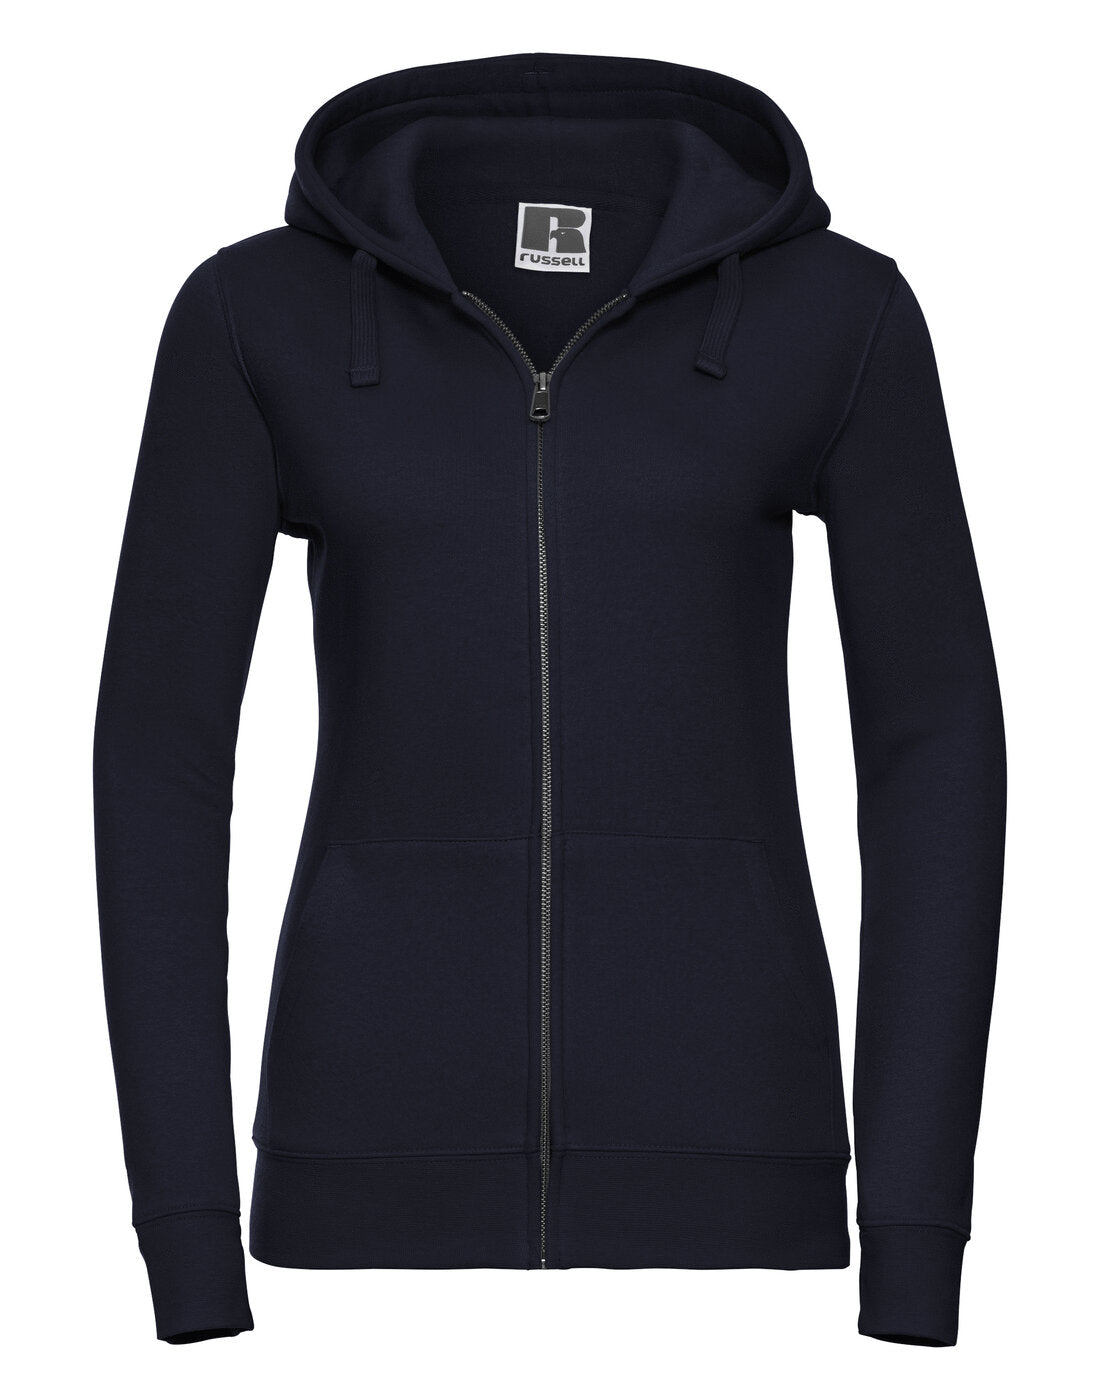 Russell Ladies Authentic Zipped Hood French Navy